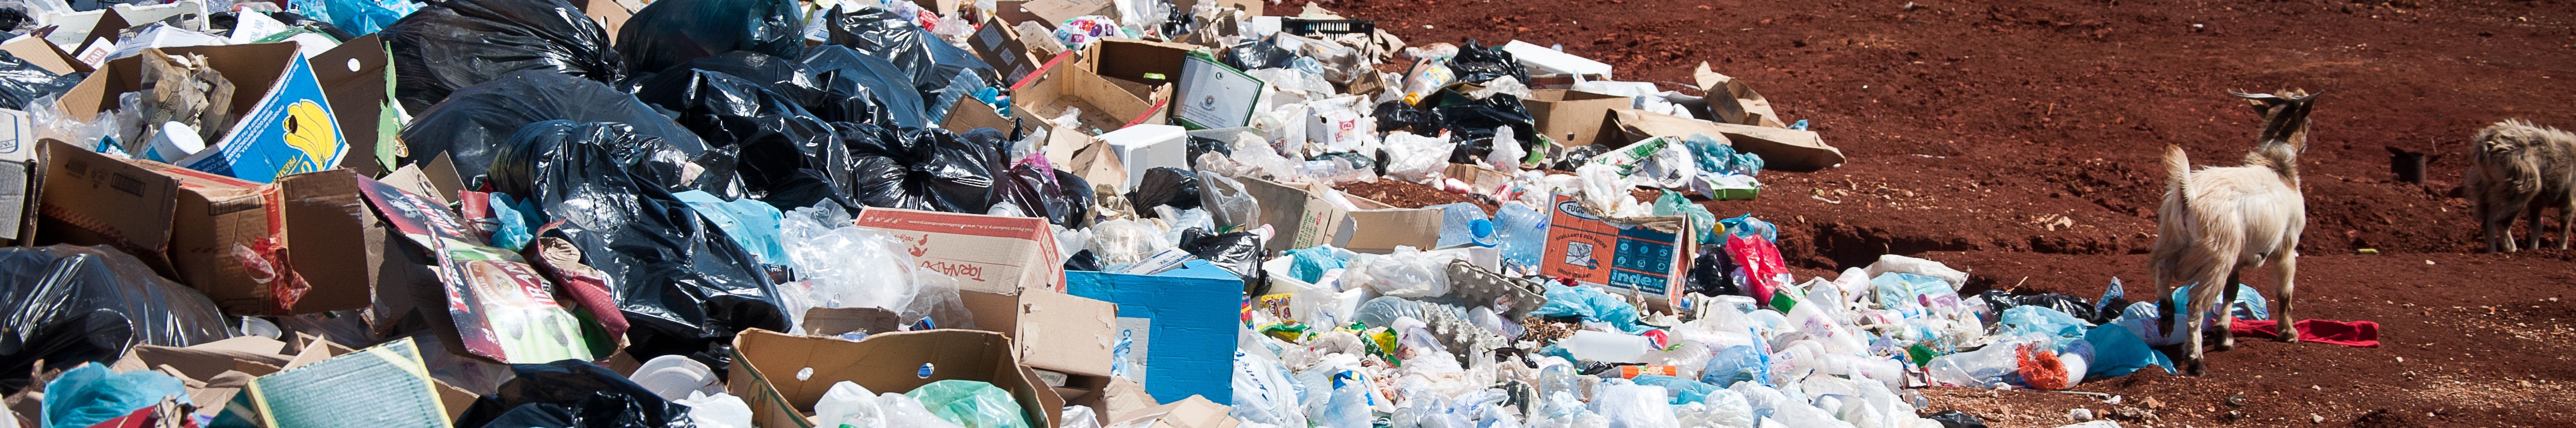 In 2022, Ascis generated 2,233 t of waste, out of which 91.3% was sustainably managed